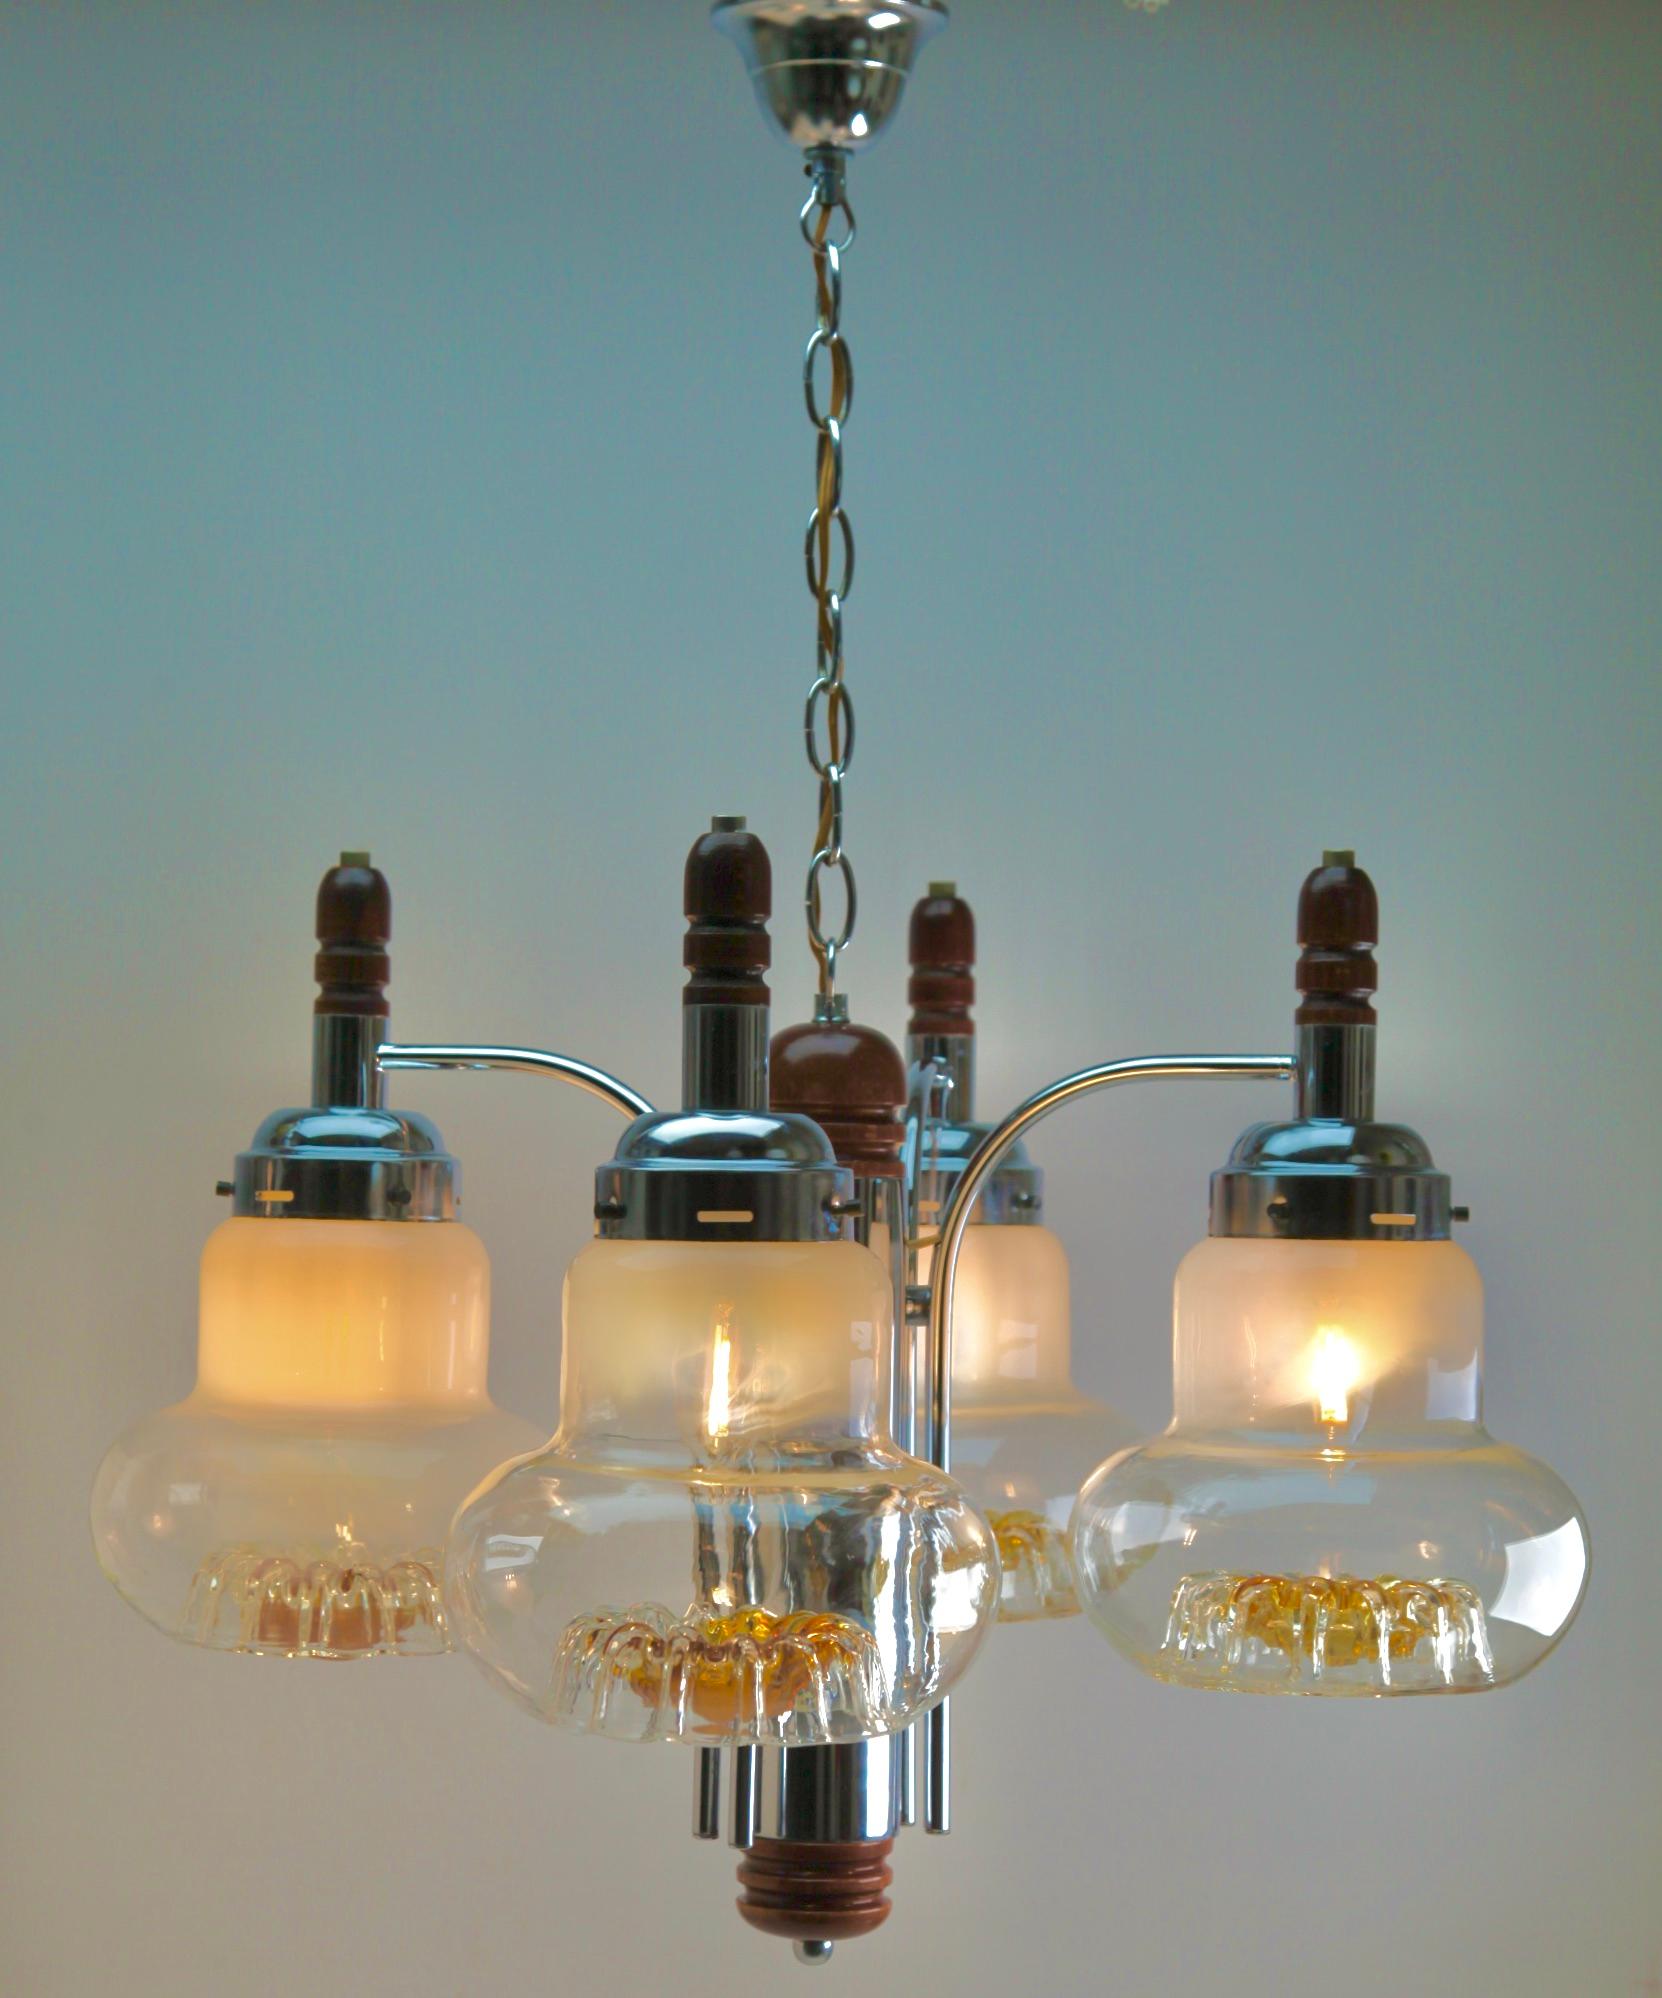 Art Deco Pendant by Mazzega with 4 Globes of Clear Glass with Orange Inclusions For Sale